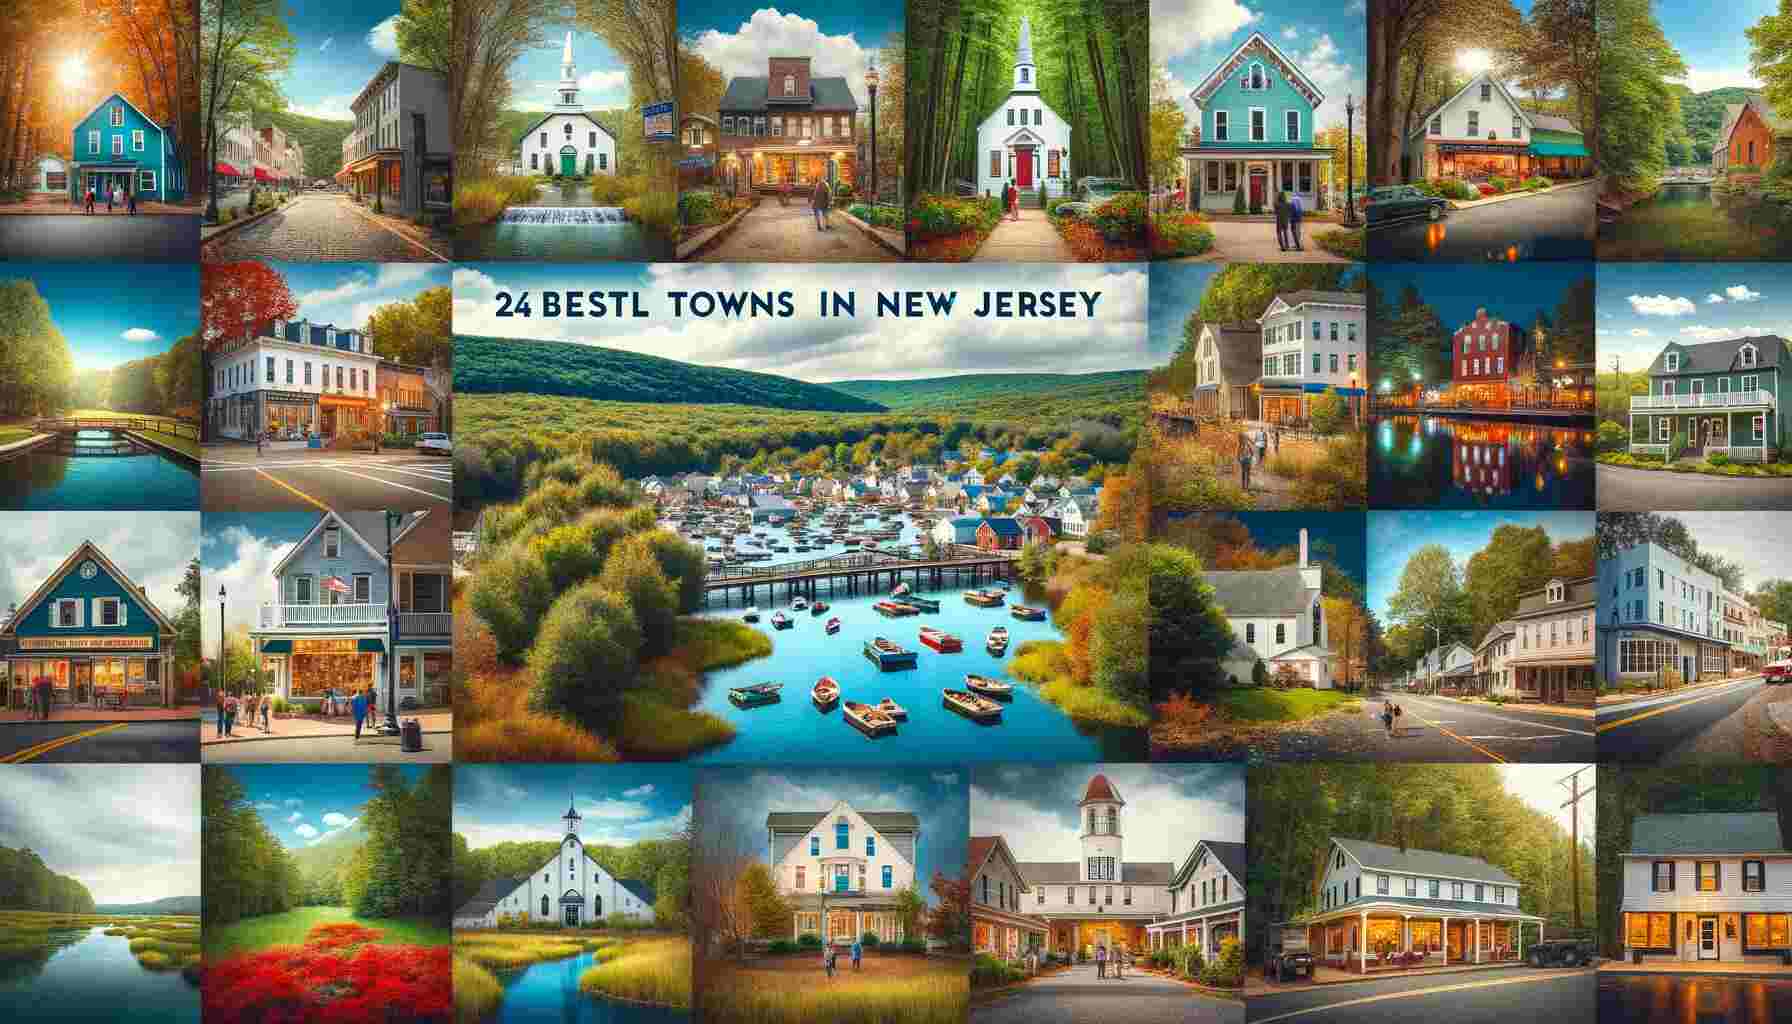 Here is the featured image depicting "24 Best Small Towns in New Jersey for Outdoor Enthusiasts." The collage showcases a variety of picturesque scenes, each representing a different town, and emphasizes the natural beauty and unique charm of these locations.